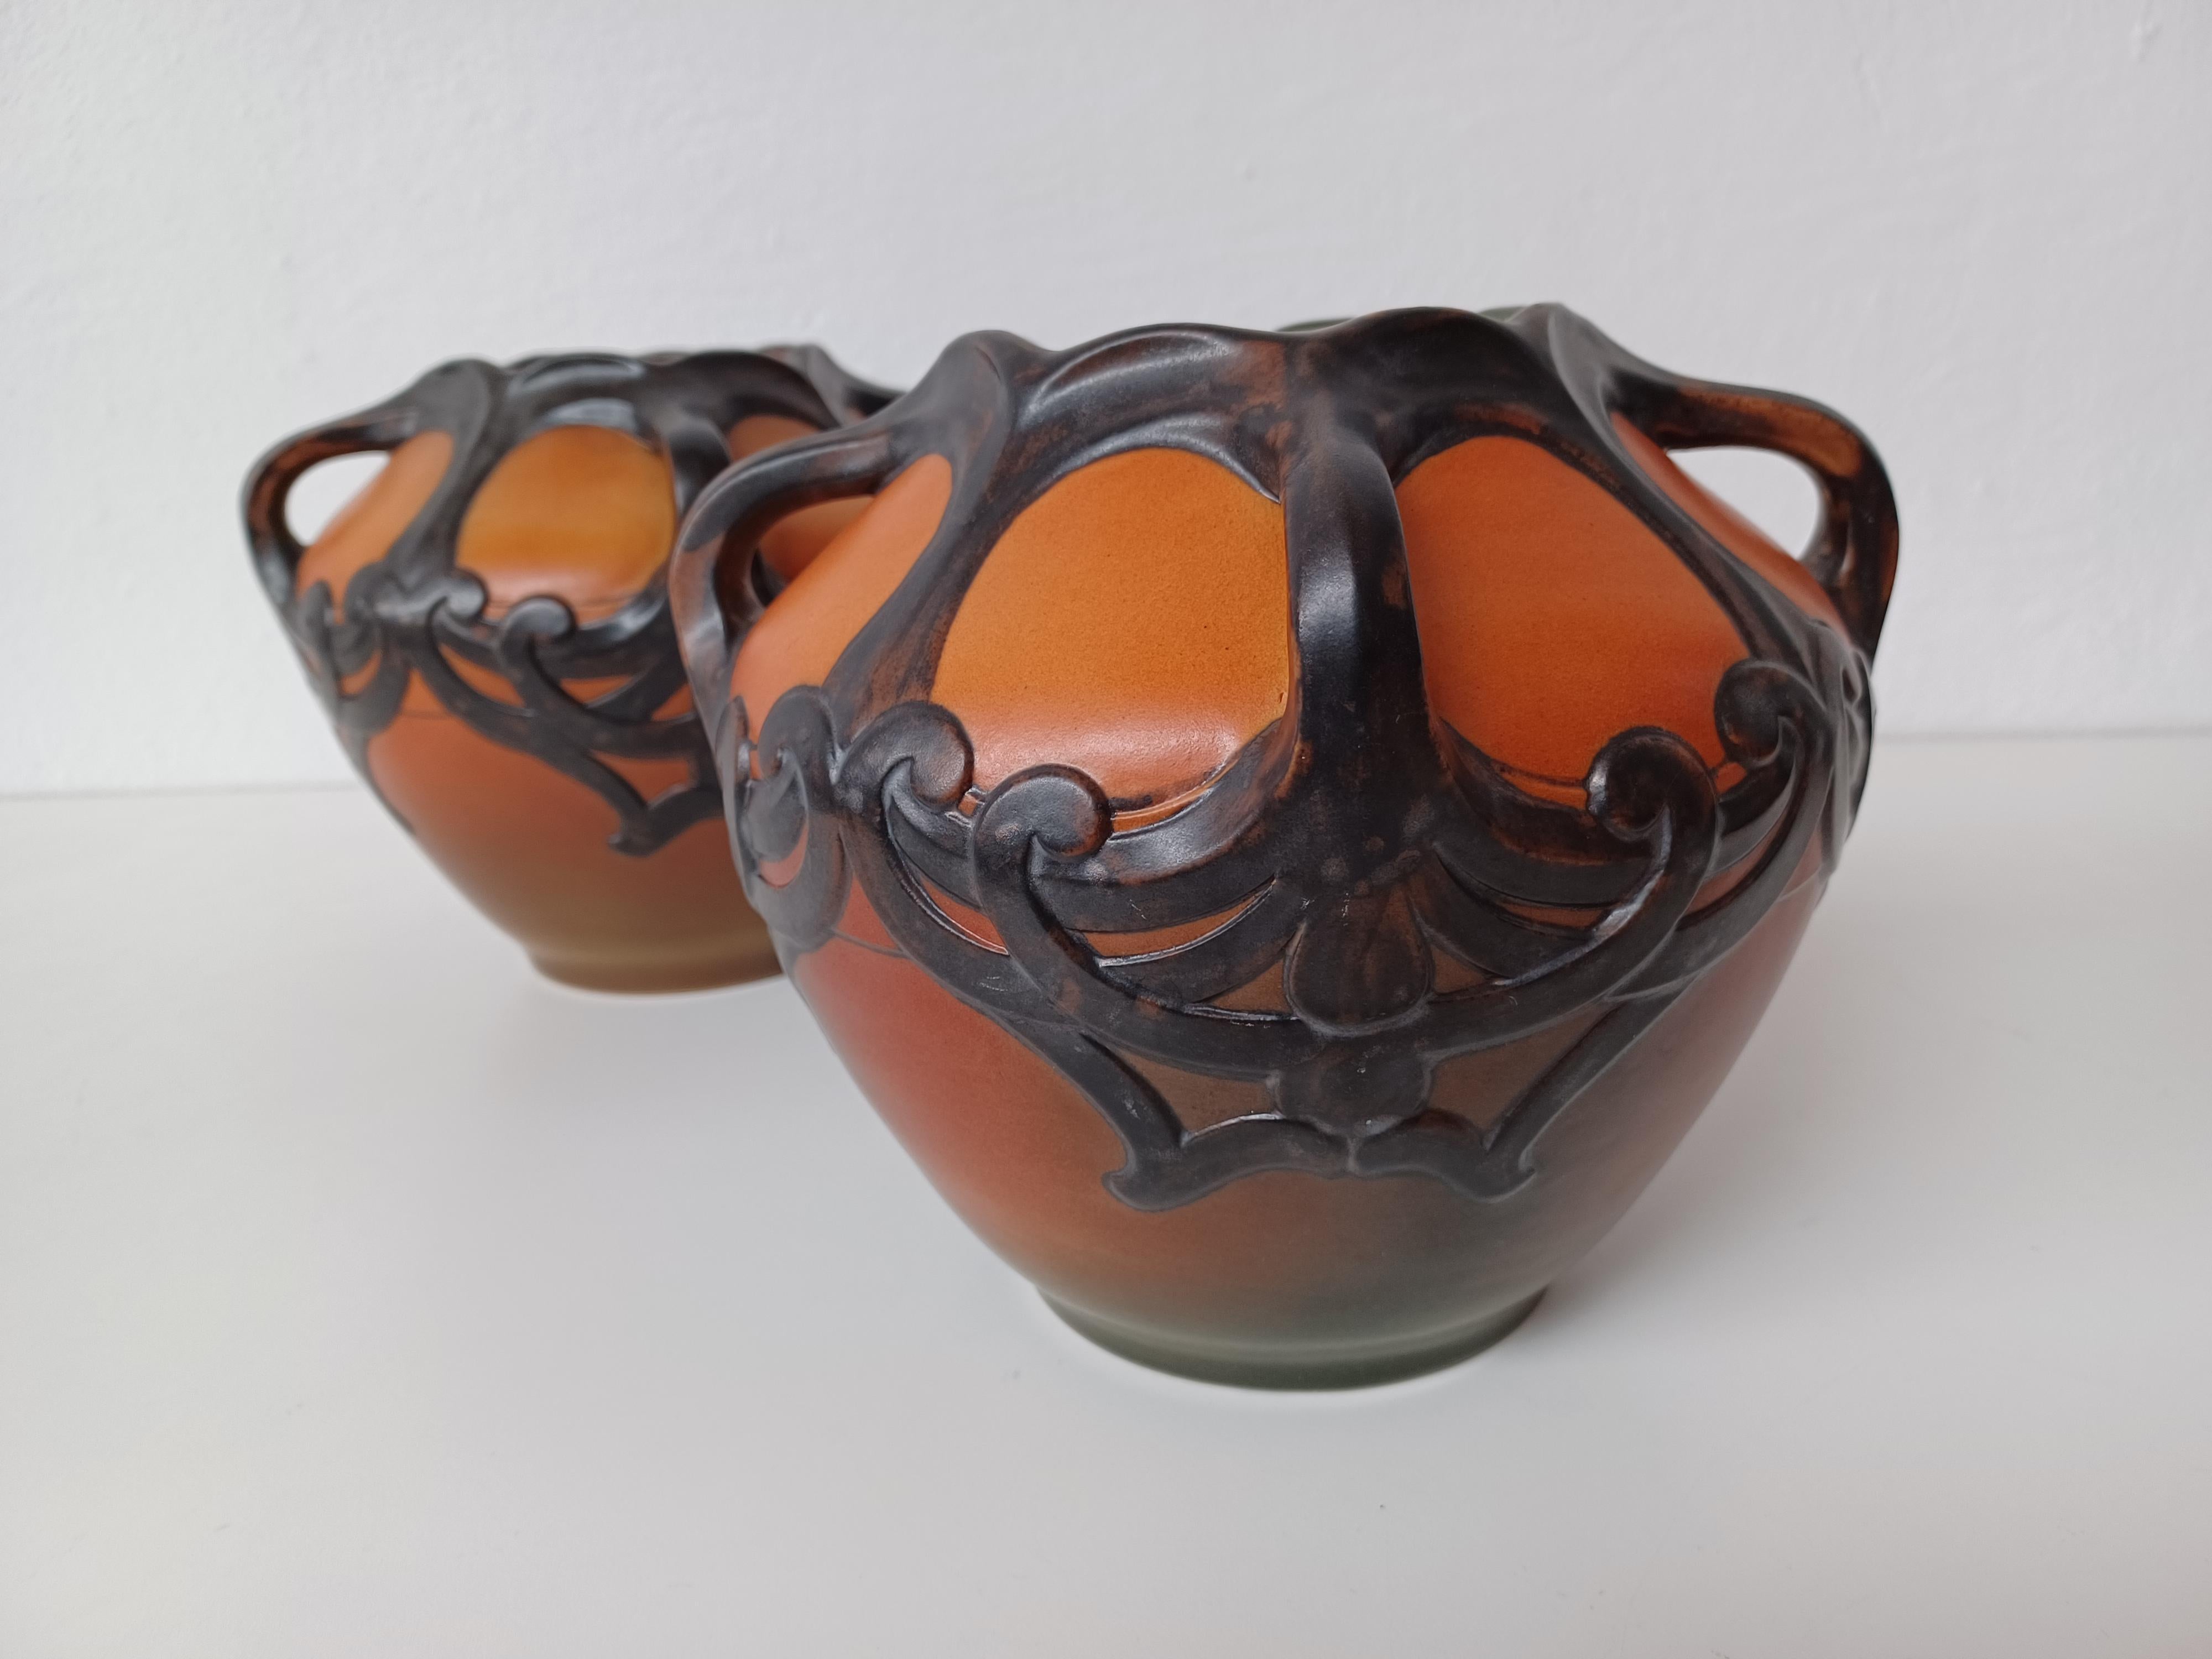 1909 Two Karen Hagen Hand-Crafted Danish Art Nouveau Vases by P. Ipsens Enke

The hand-crafted art nouveau vases feature art nuveau pattern with 4 handles as integrated part of the decoration are in very good condition.

P. Ipsens Enke (1843 - 1955)